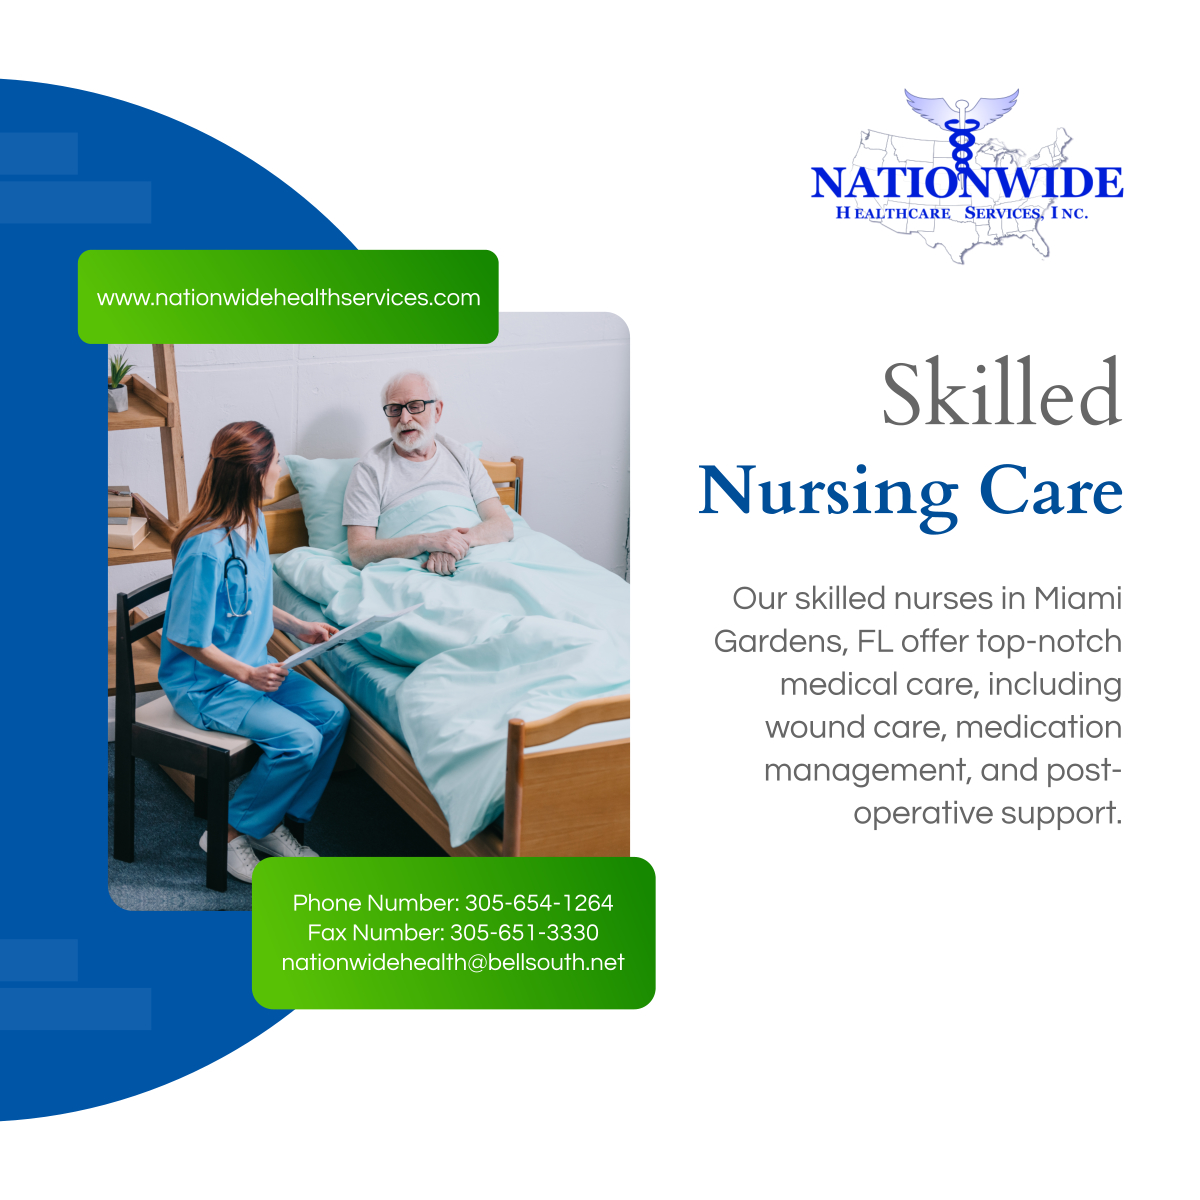 Experience exceptional medical care with our skilled nursing services. Call now to schedule an appointment and receive the care you deserve. 

#MiamiGardensFL #HomeHealthCare #SkilledNursing #SkilledNurses #PersonalizedCare